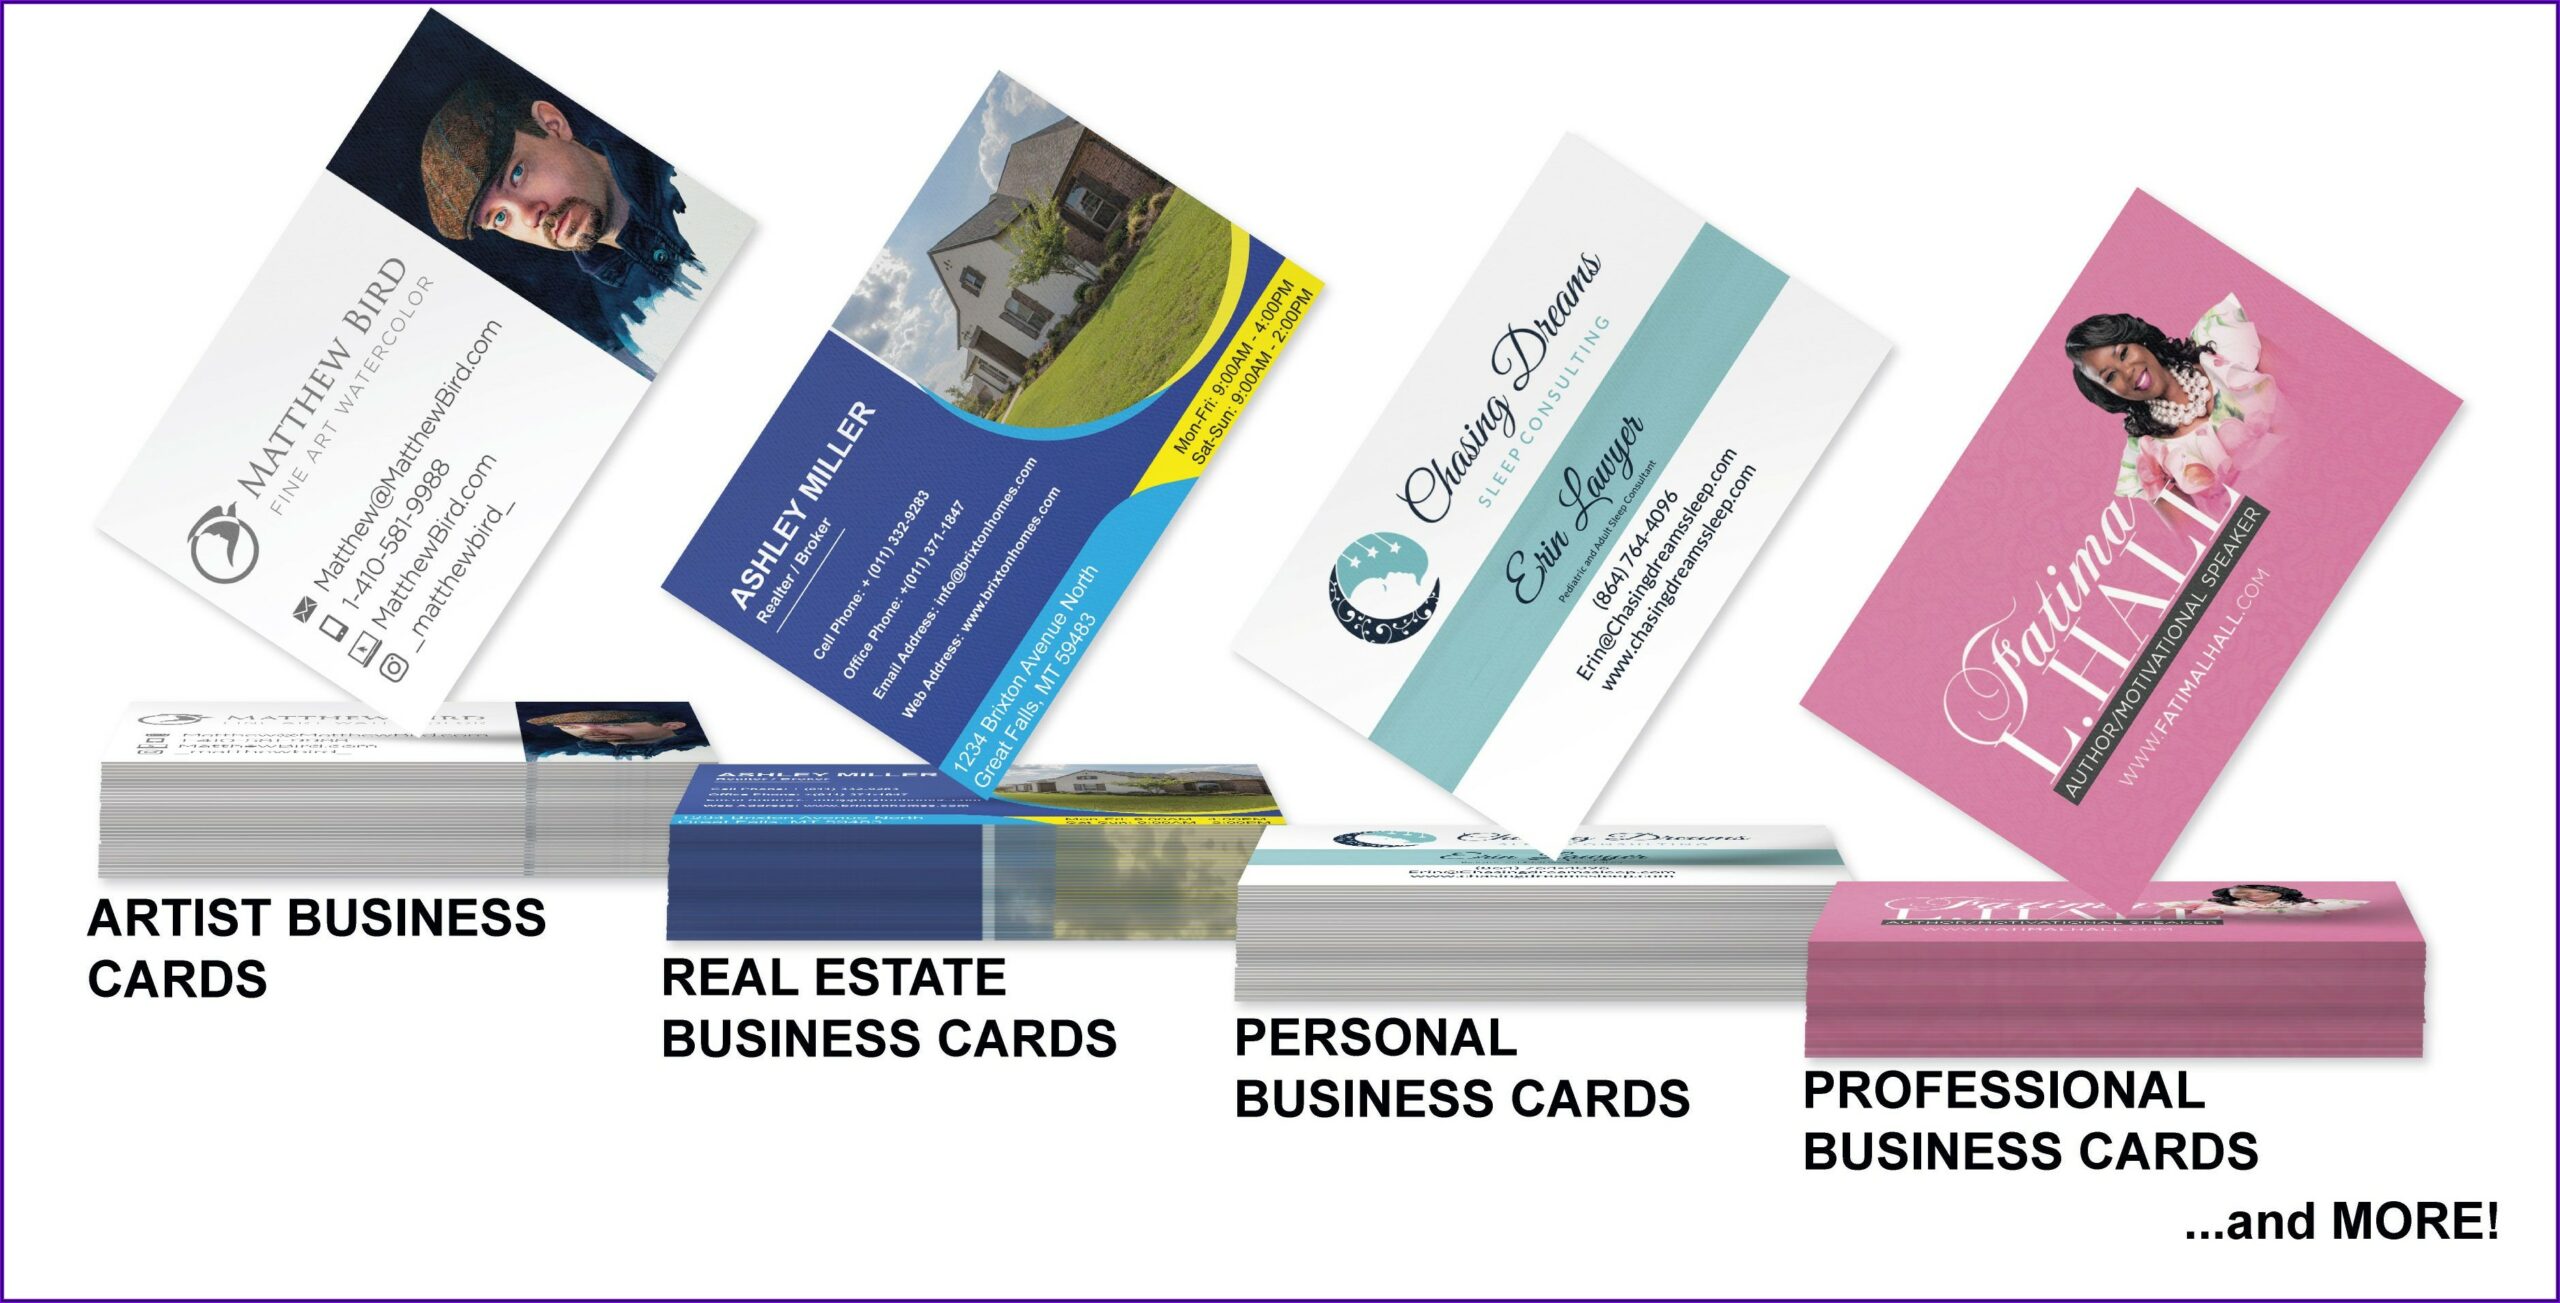 One Day Business Cards Staples